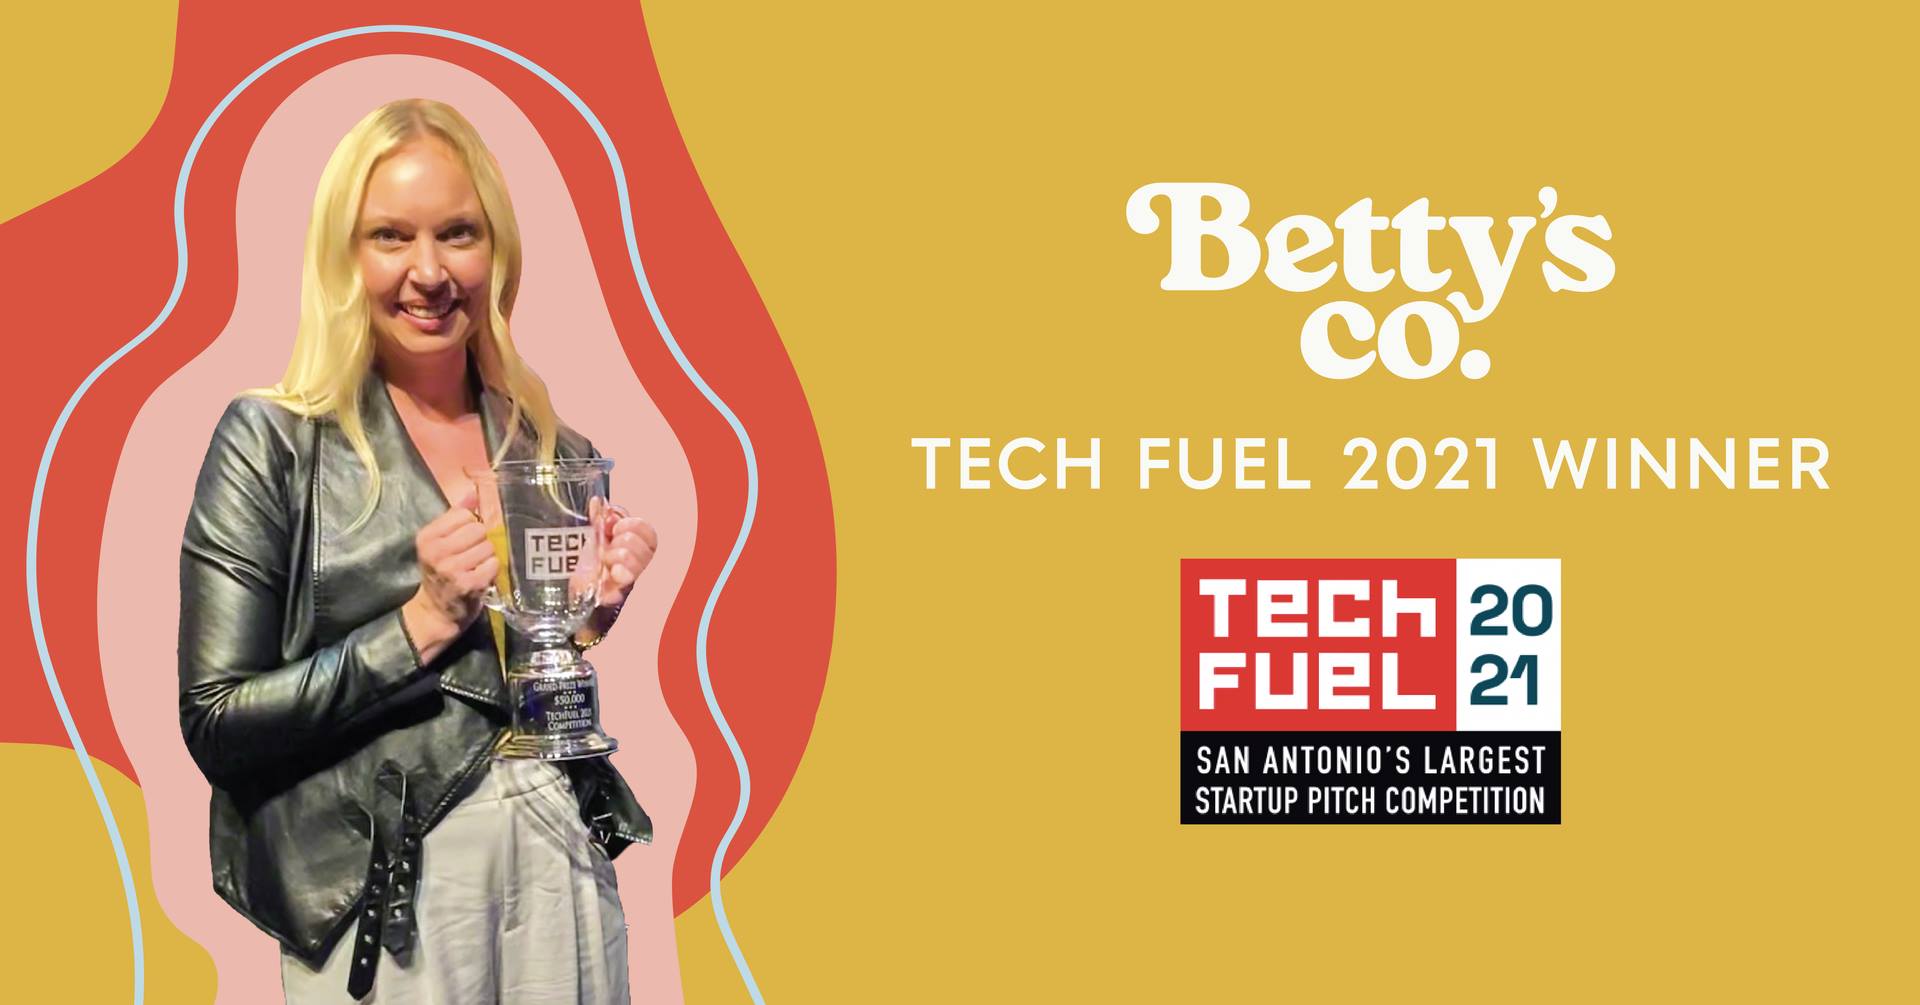 TECH BLOC AND BEXAR COUNTY ANNOUNCE $100,000 STARTUP PITCH COMPETITION - 2023